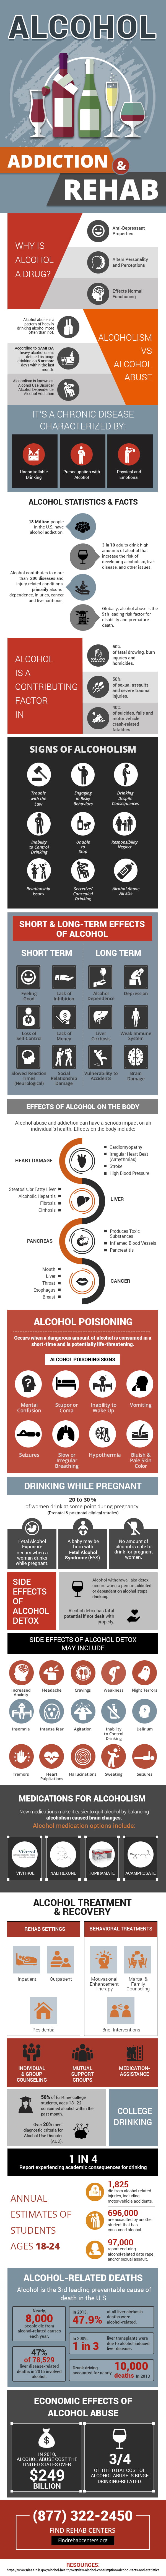 Alcohol infographic